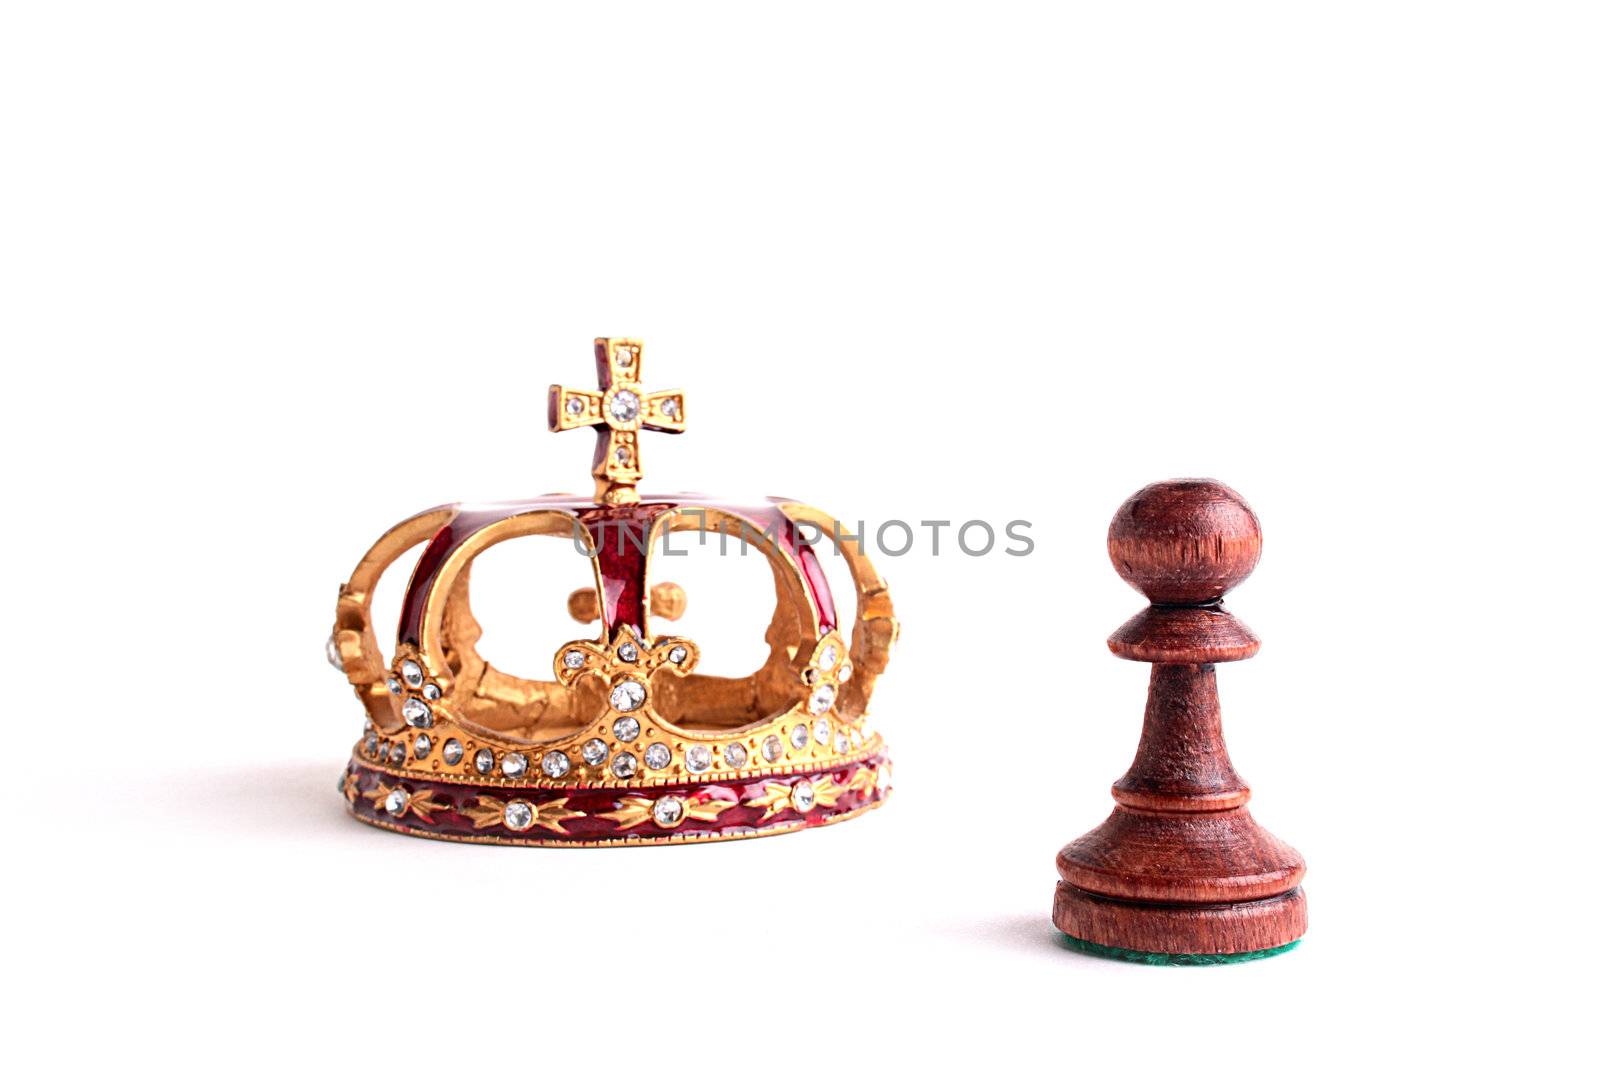 Pawn - a chess figure and a crown on a background.